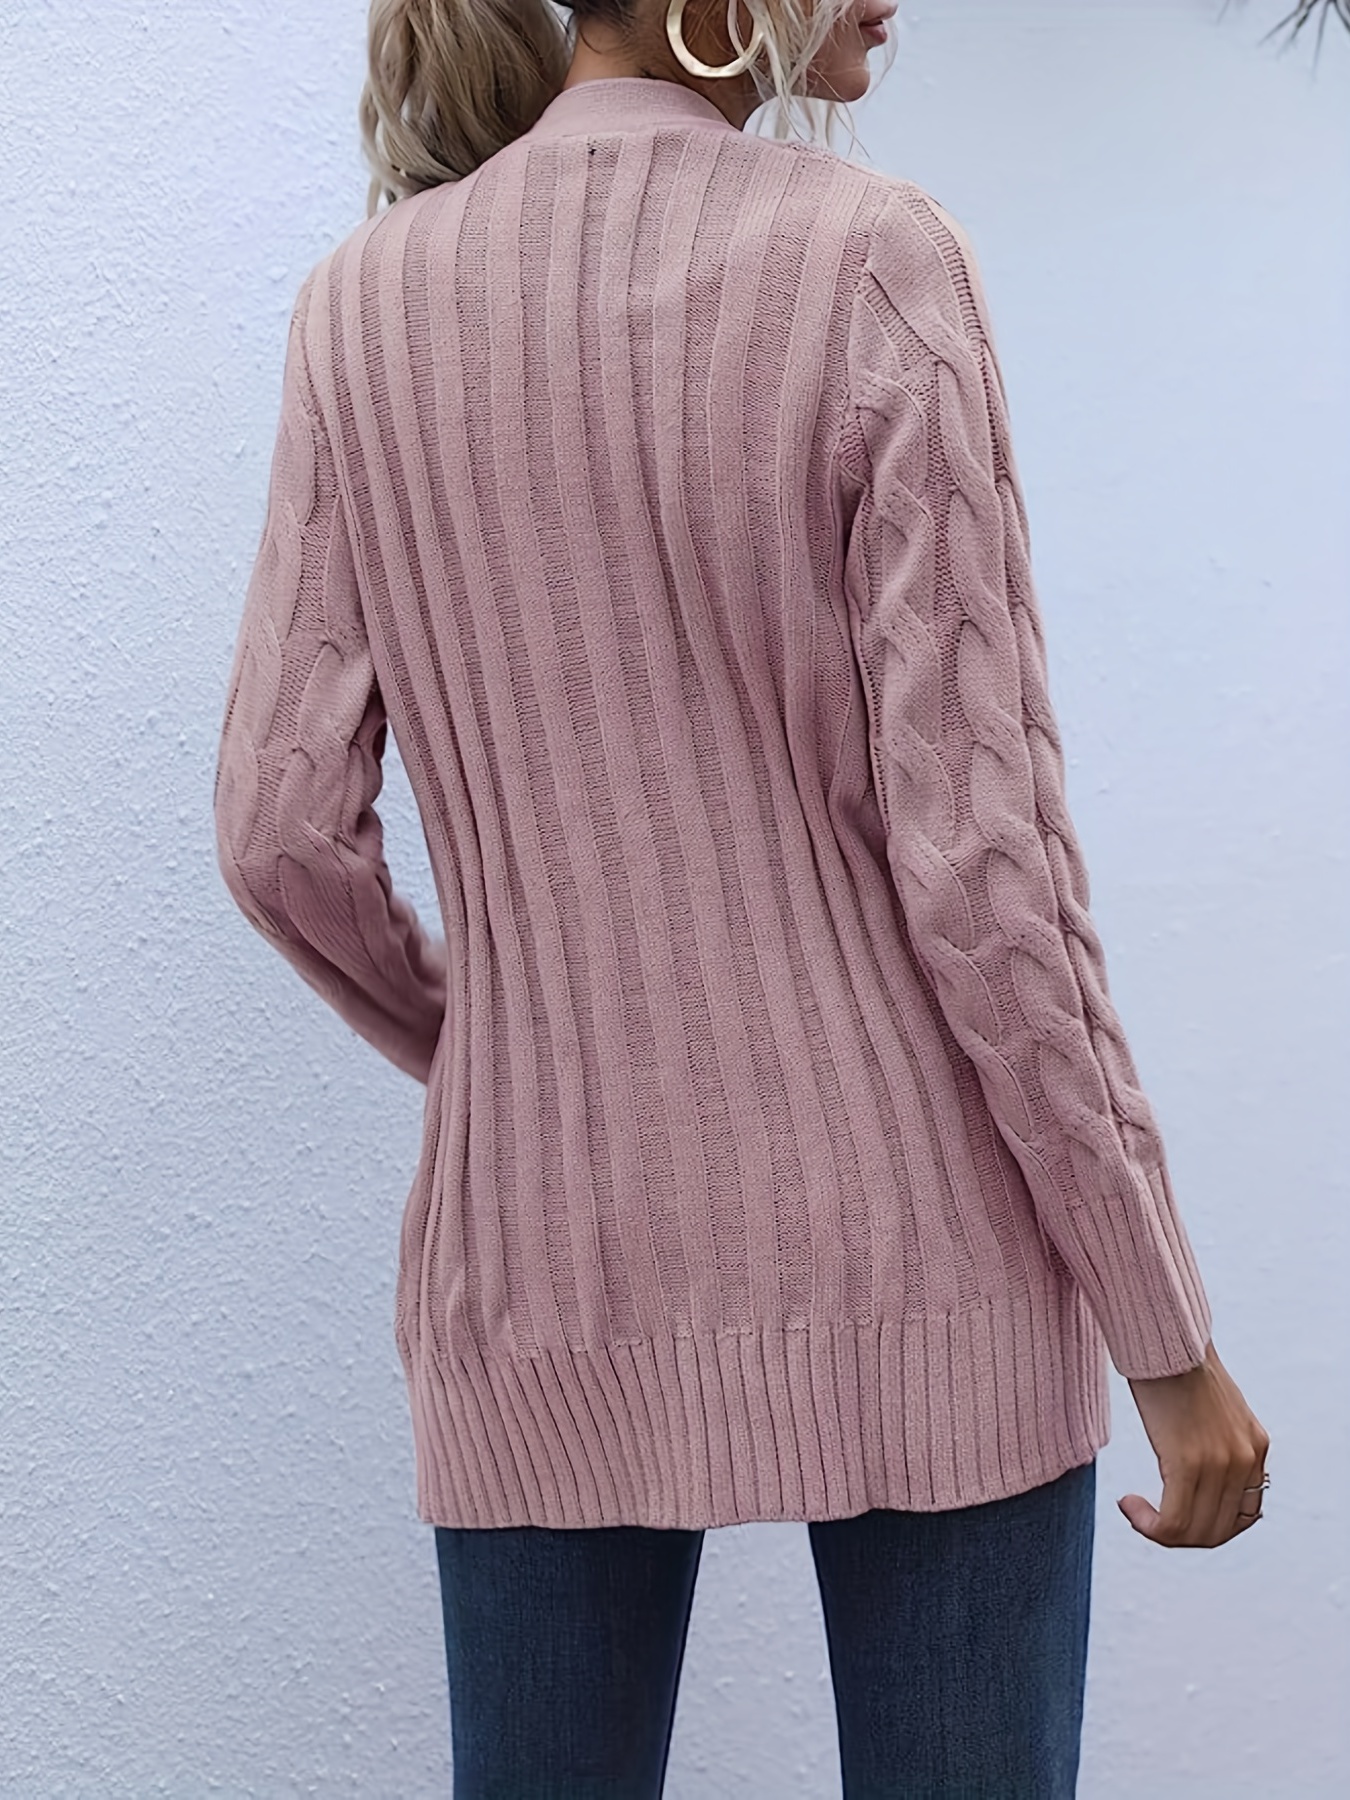 Women Cardigan Casual Autumn Neck Sweater Soft Knitted Single